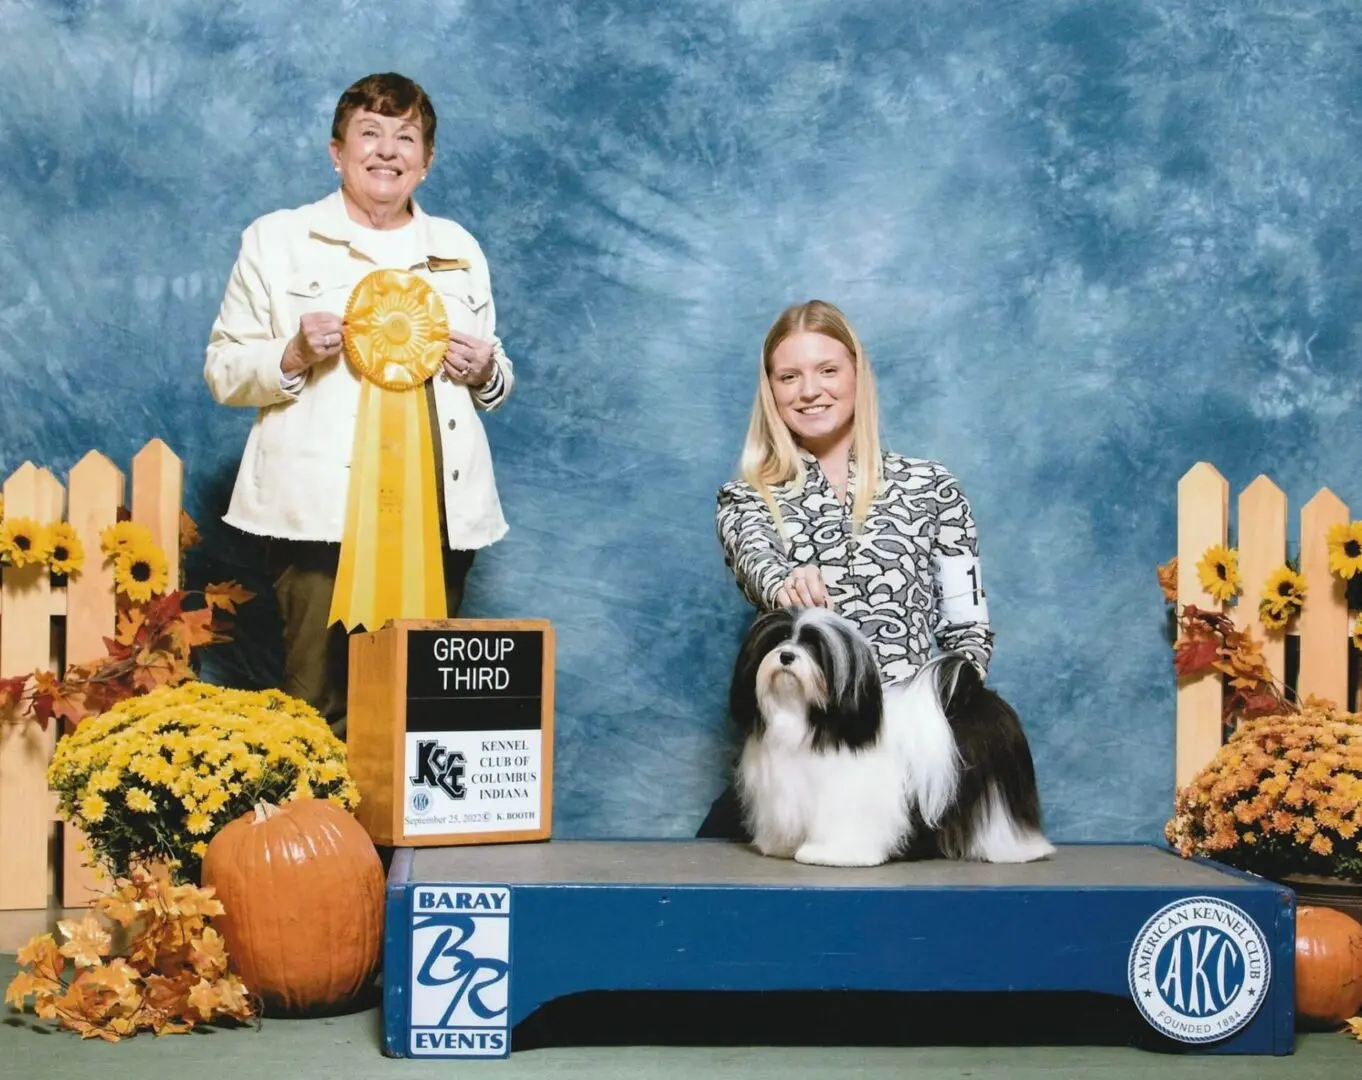 Two women posing with a shih tzu puppy in front of a pumpkin.